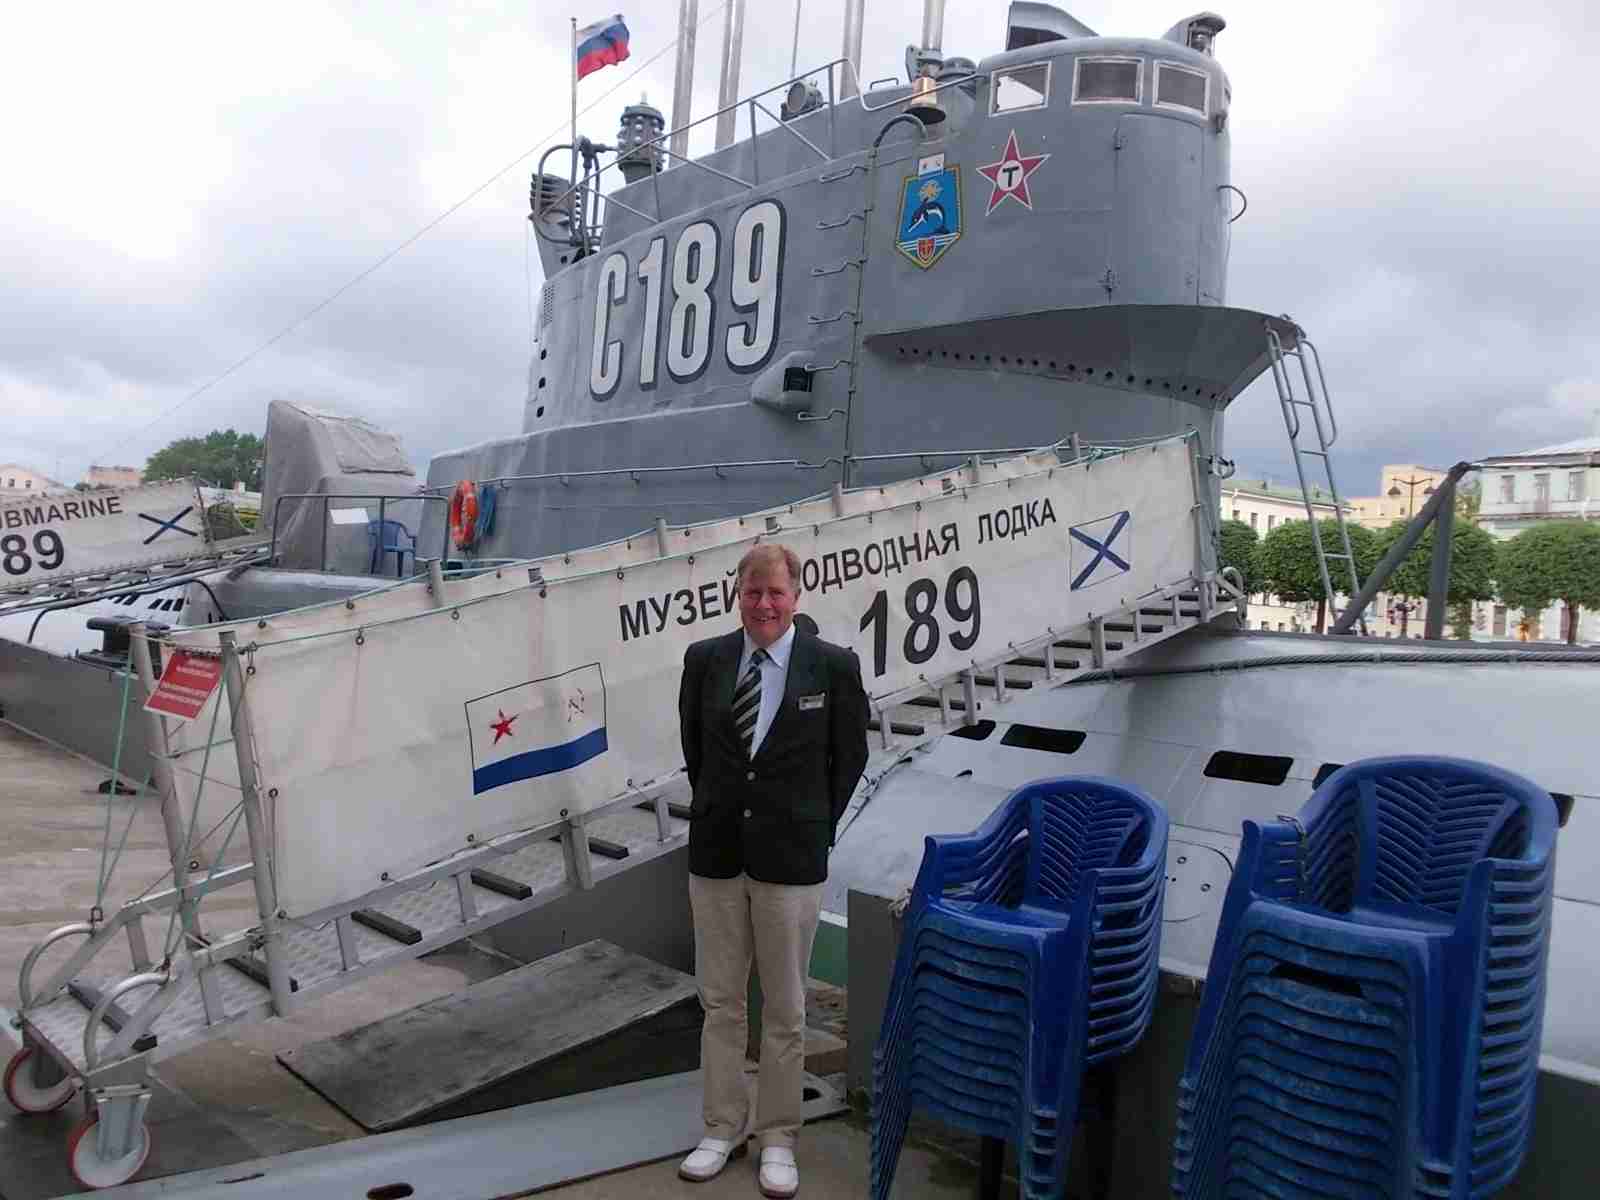 Old Soviet submarine in St. Petersburg, photograph taken by Dr. Brian Dunn